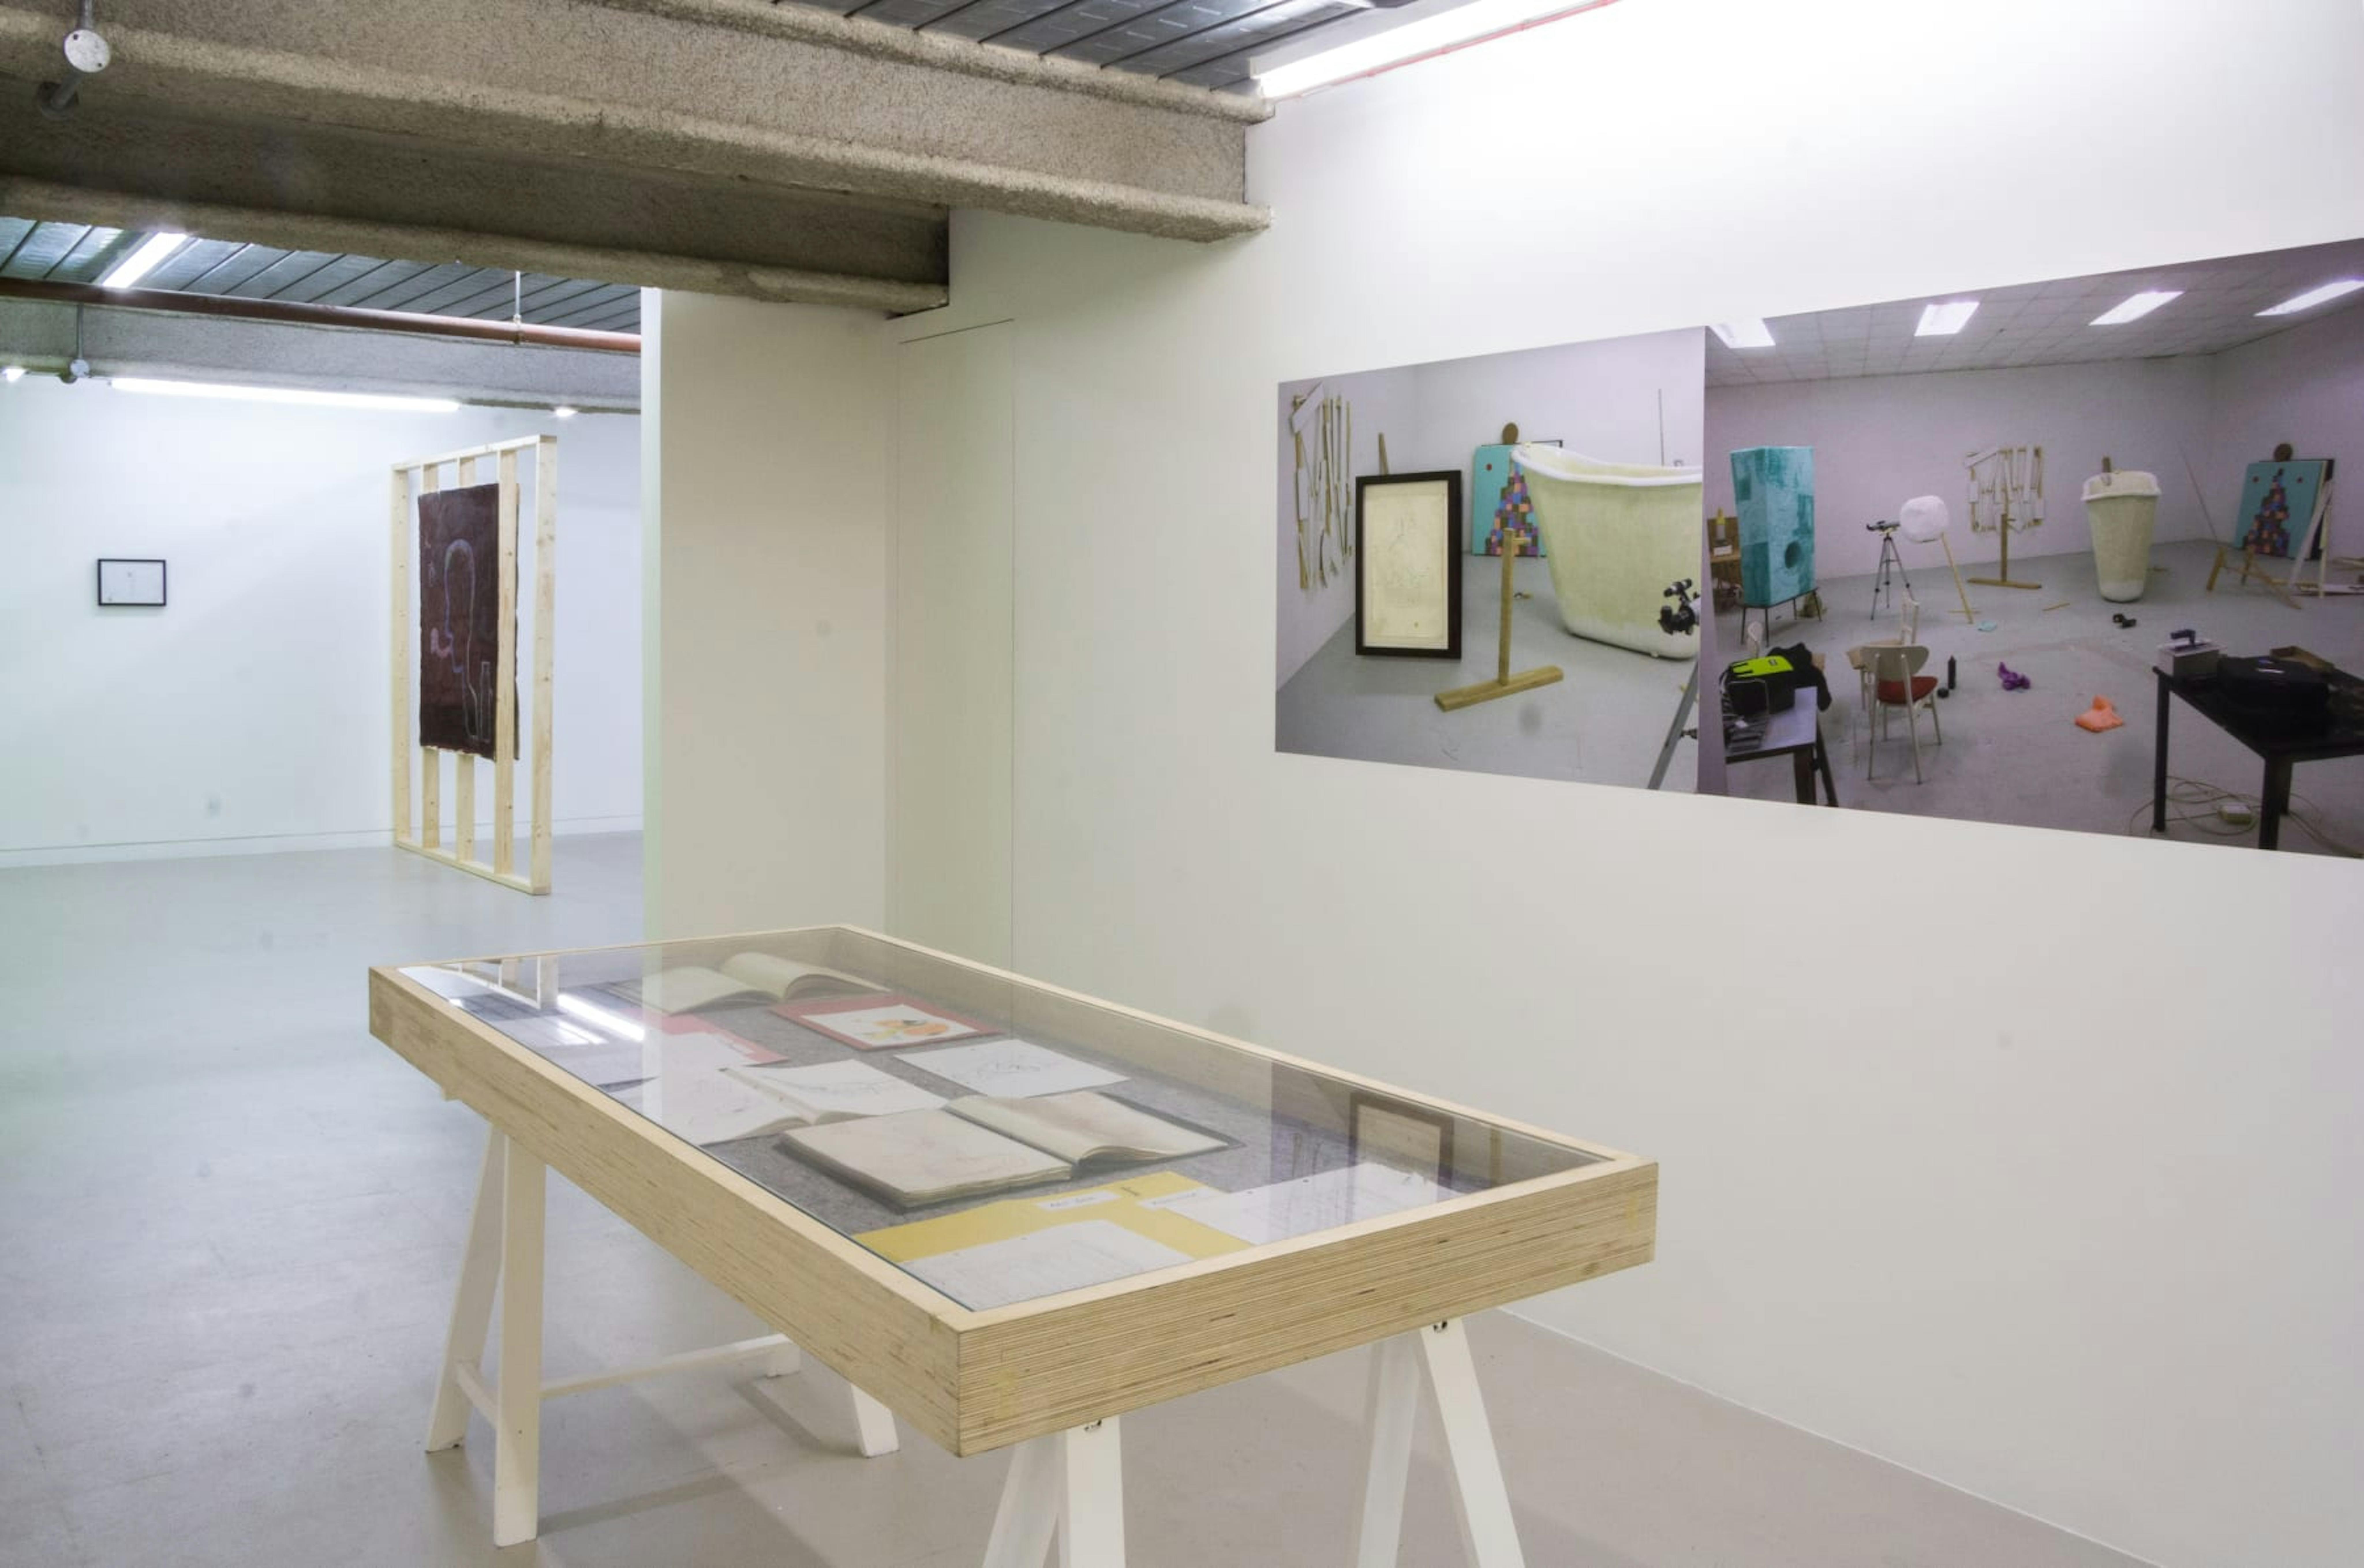 In the foreground is a vitrine with drawings and sketchbooks. The wall contains large photographs of the artist's studio revealing hidden processes that are typically hidden away. 